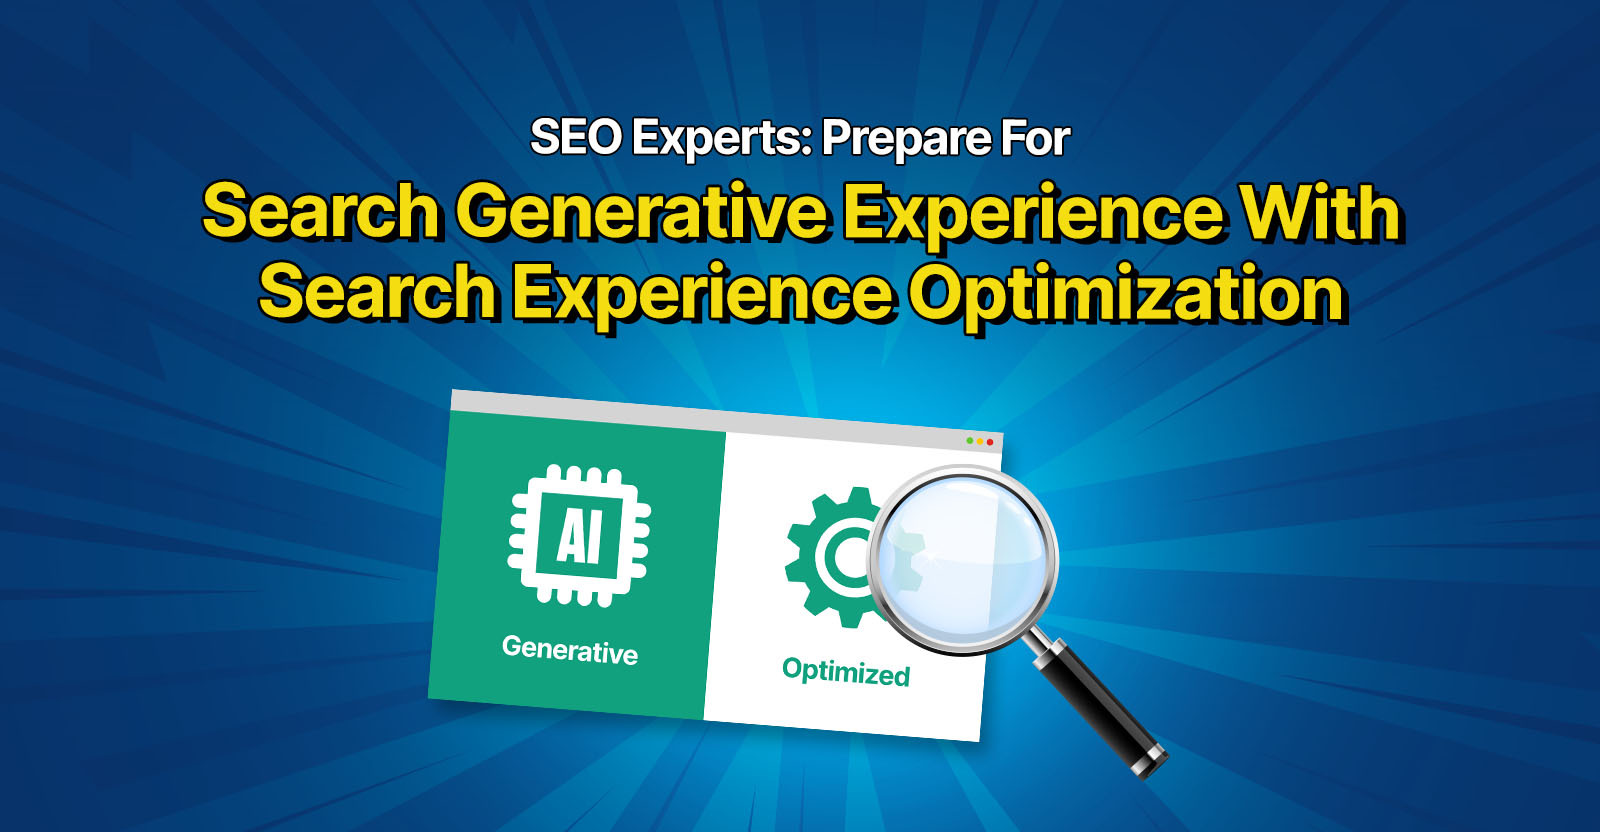 SEO Experts: Prepare For Search Generative Experience With “Search Experience Optimization”